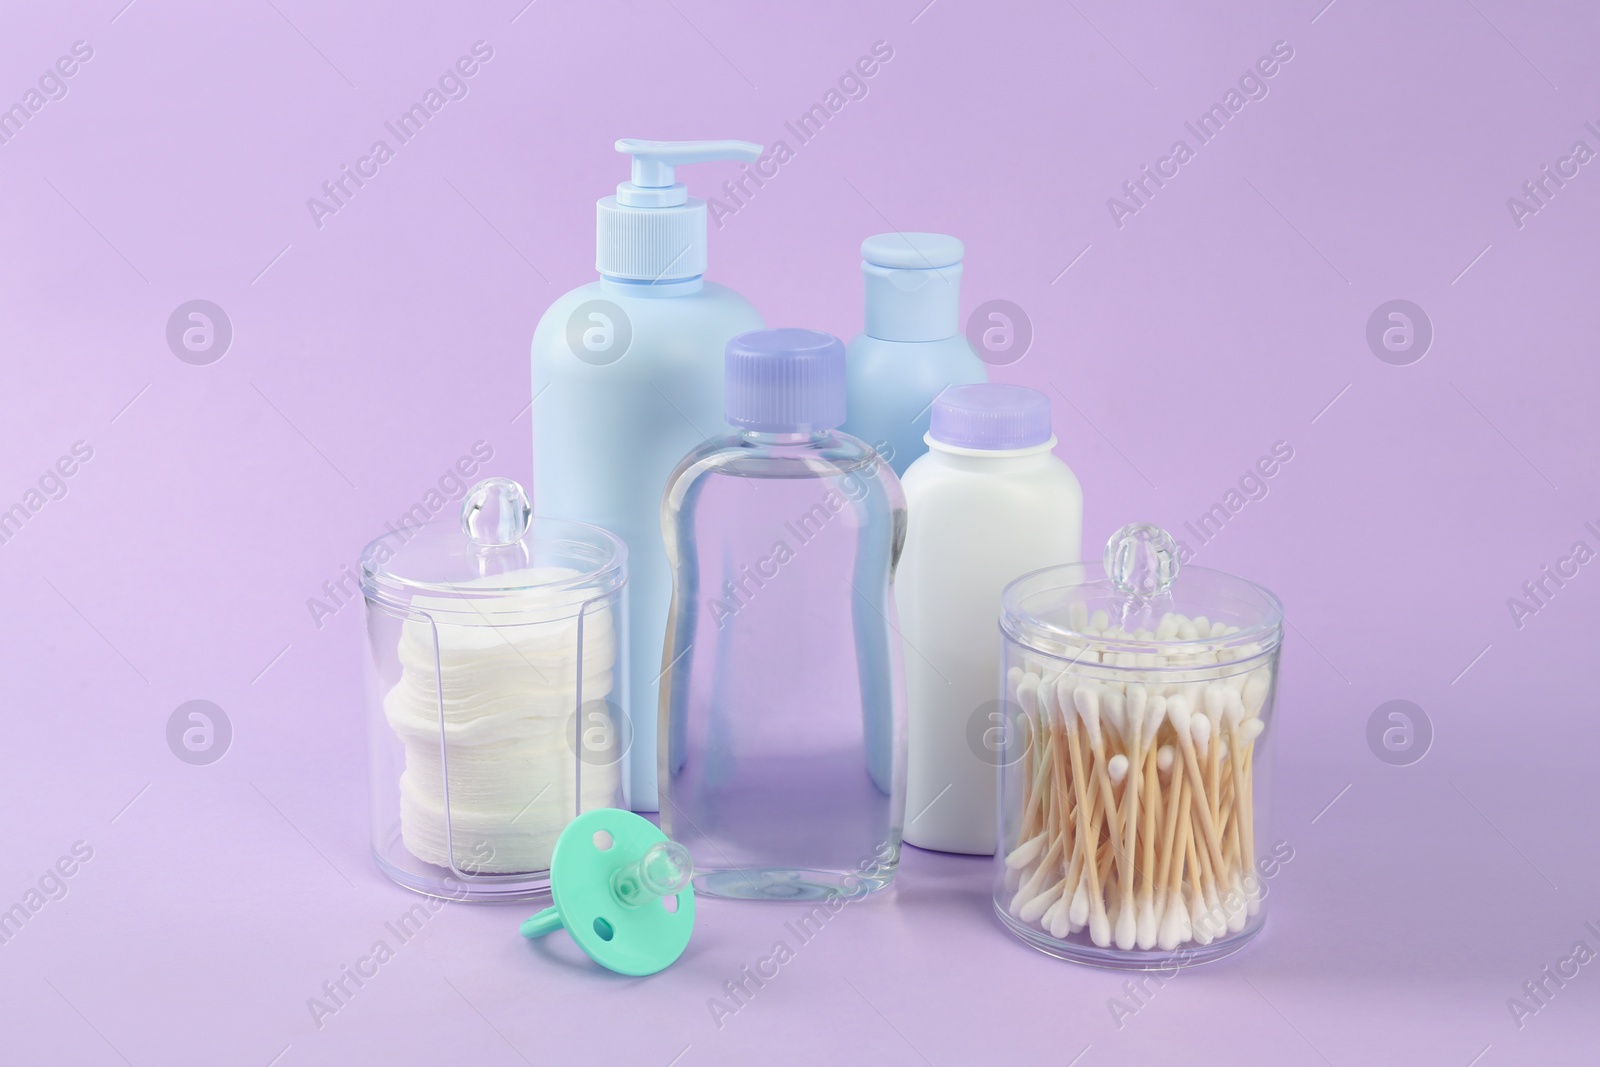 Photo of Different skin care products for baby and pacifier on violet background